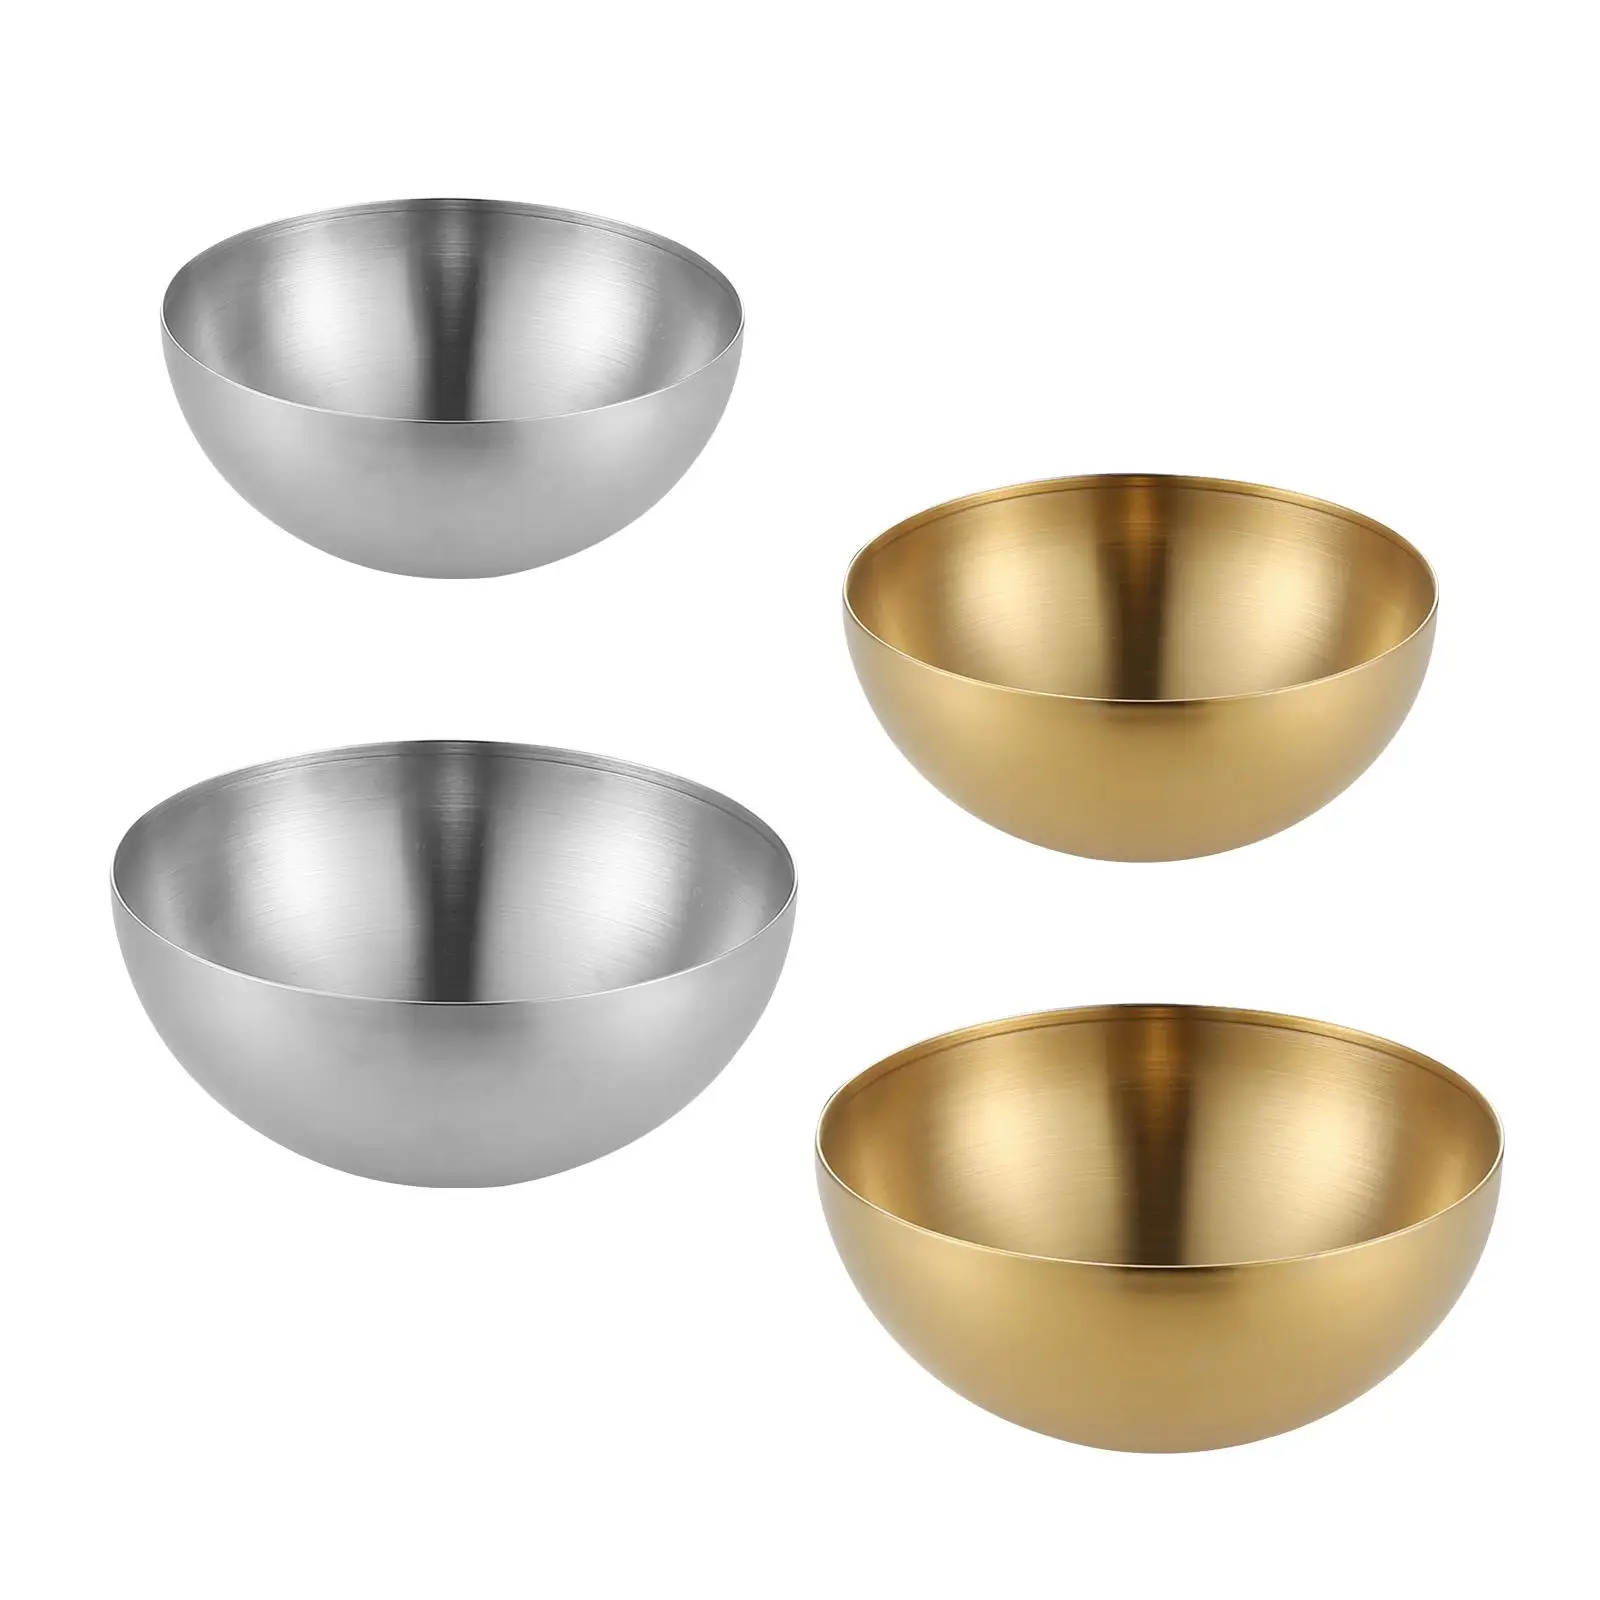 Metal Bowls Food Storage Organizers Stackable High Capacity Multipurpose Stainless Steel Mixing Bowls for Baking Kids rice